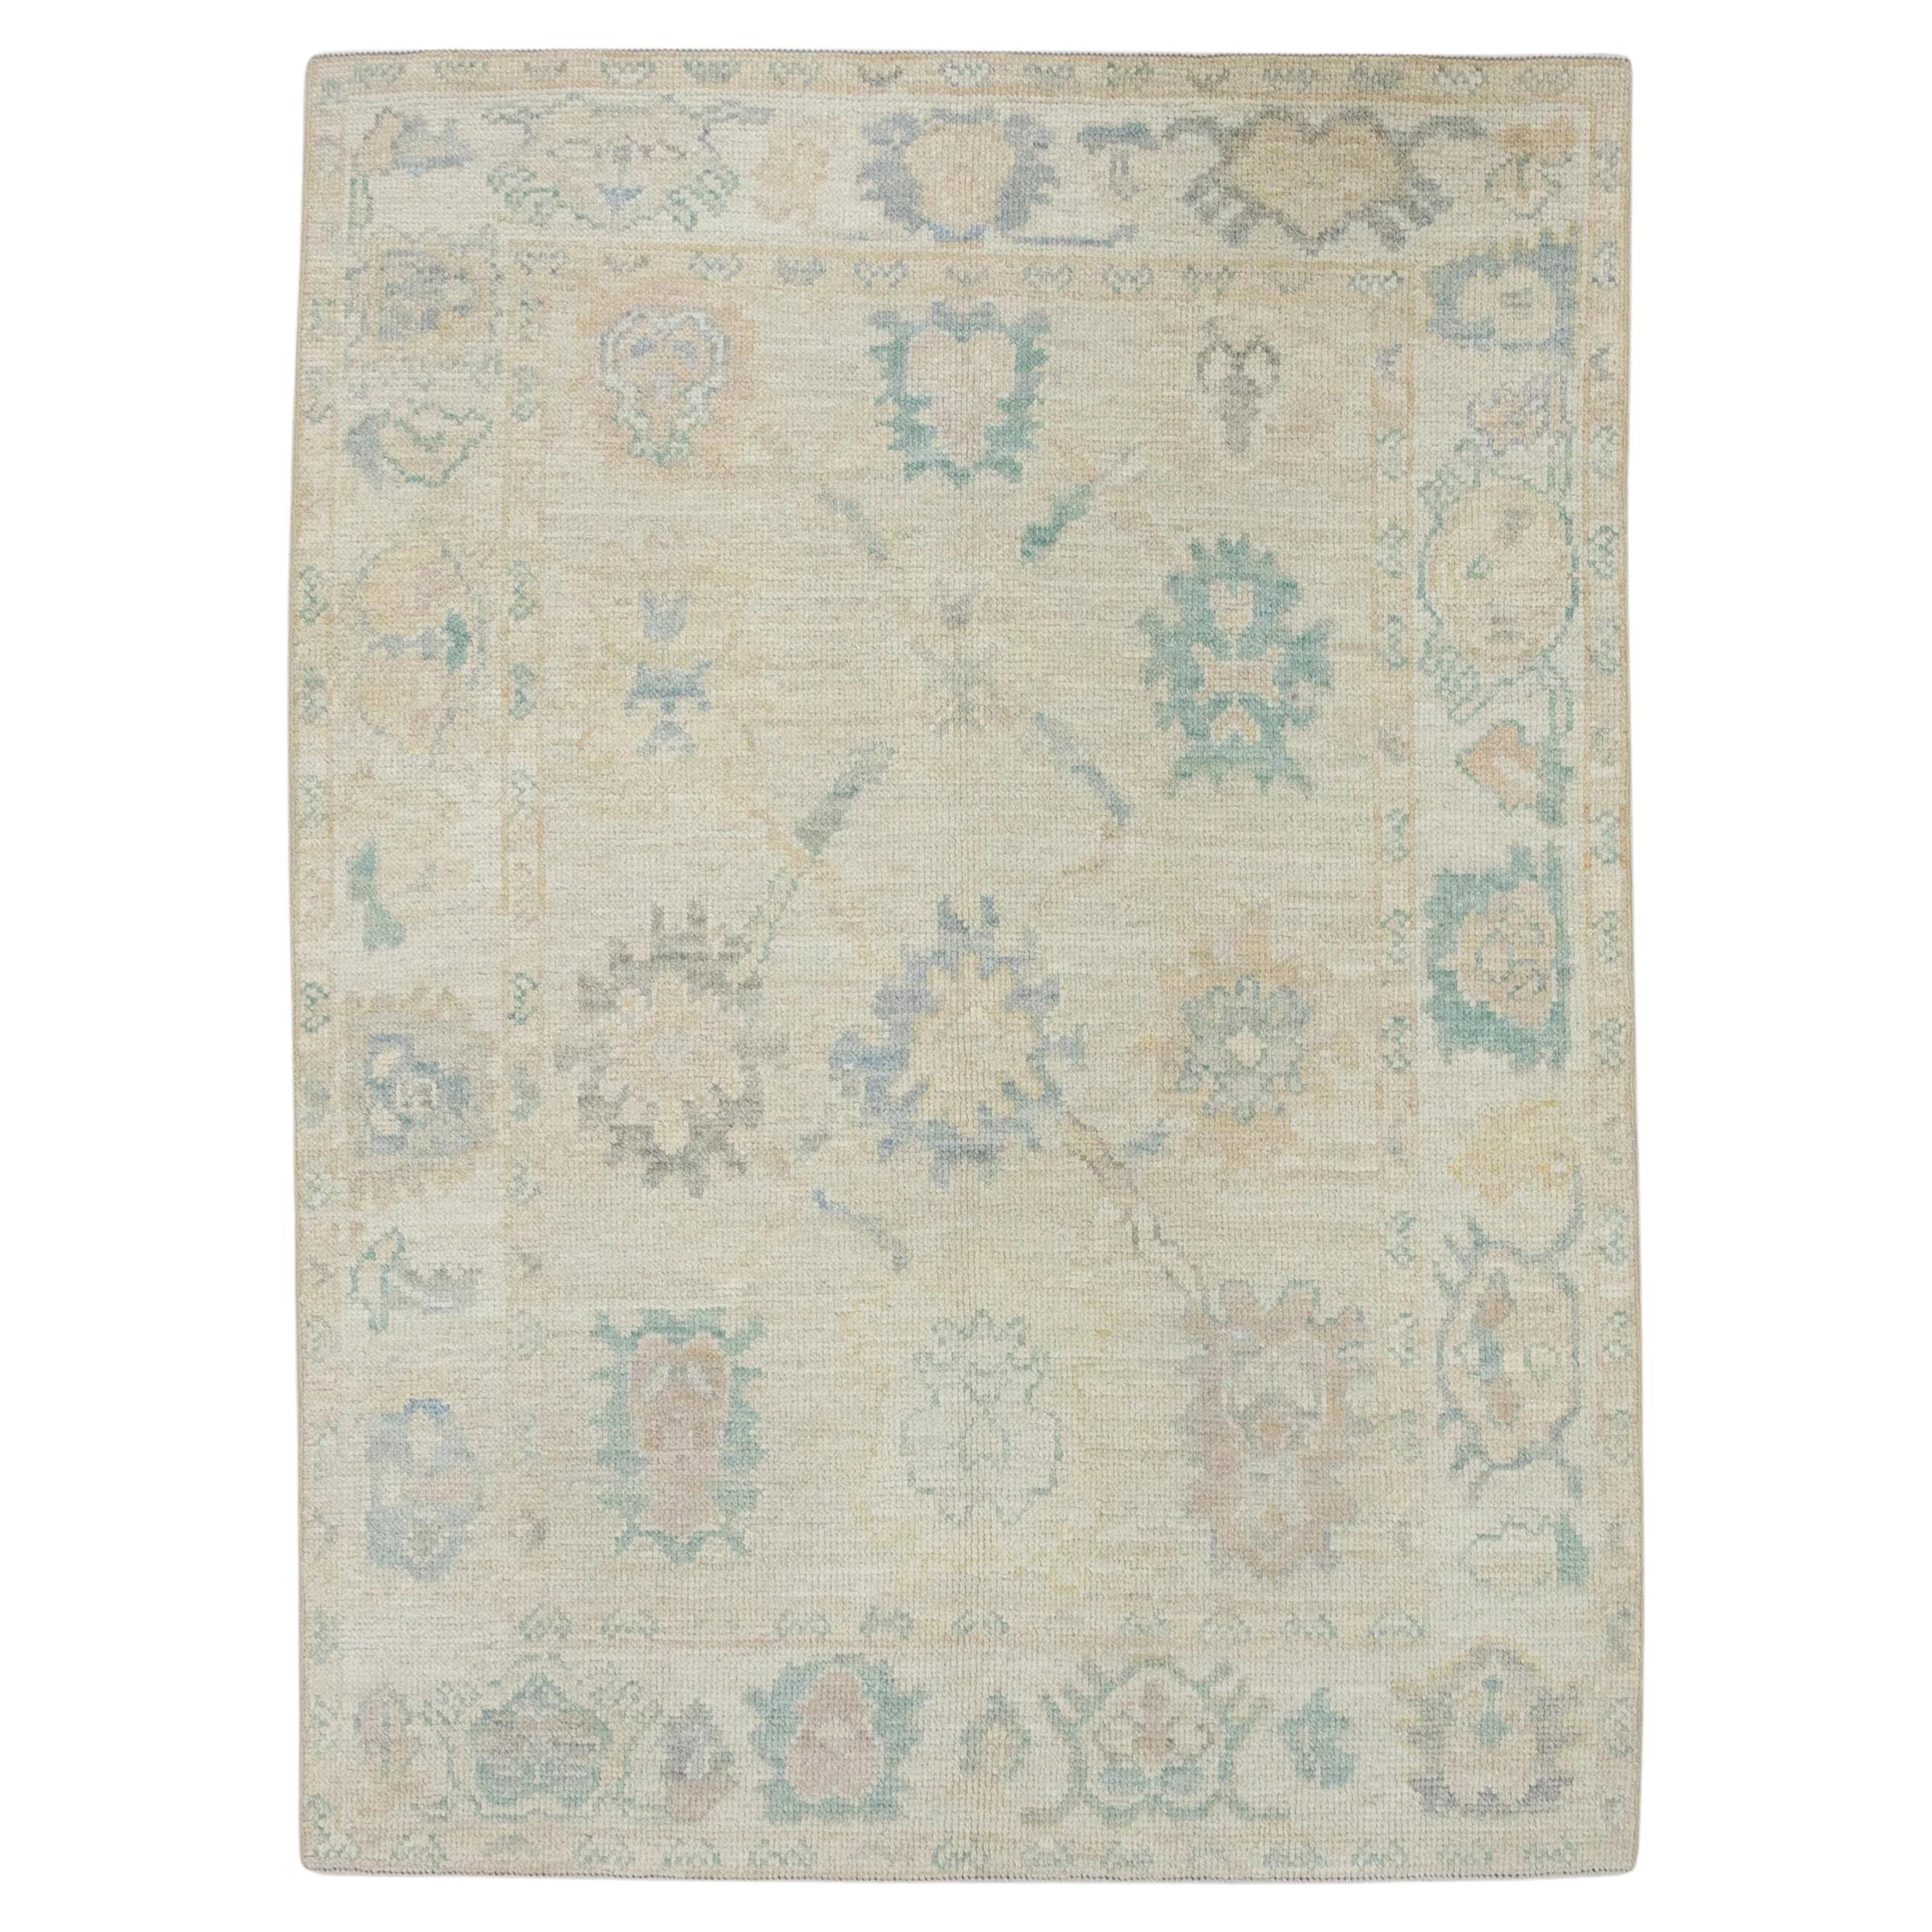 Multicolor Handwoven Wool Turkish Oushak Rug in Floral Design 4' x 5'9"